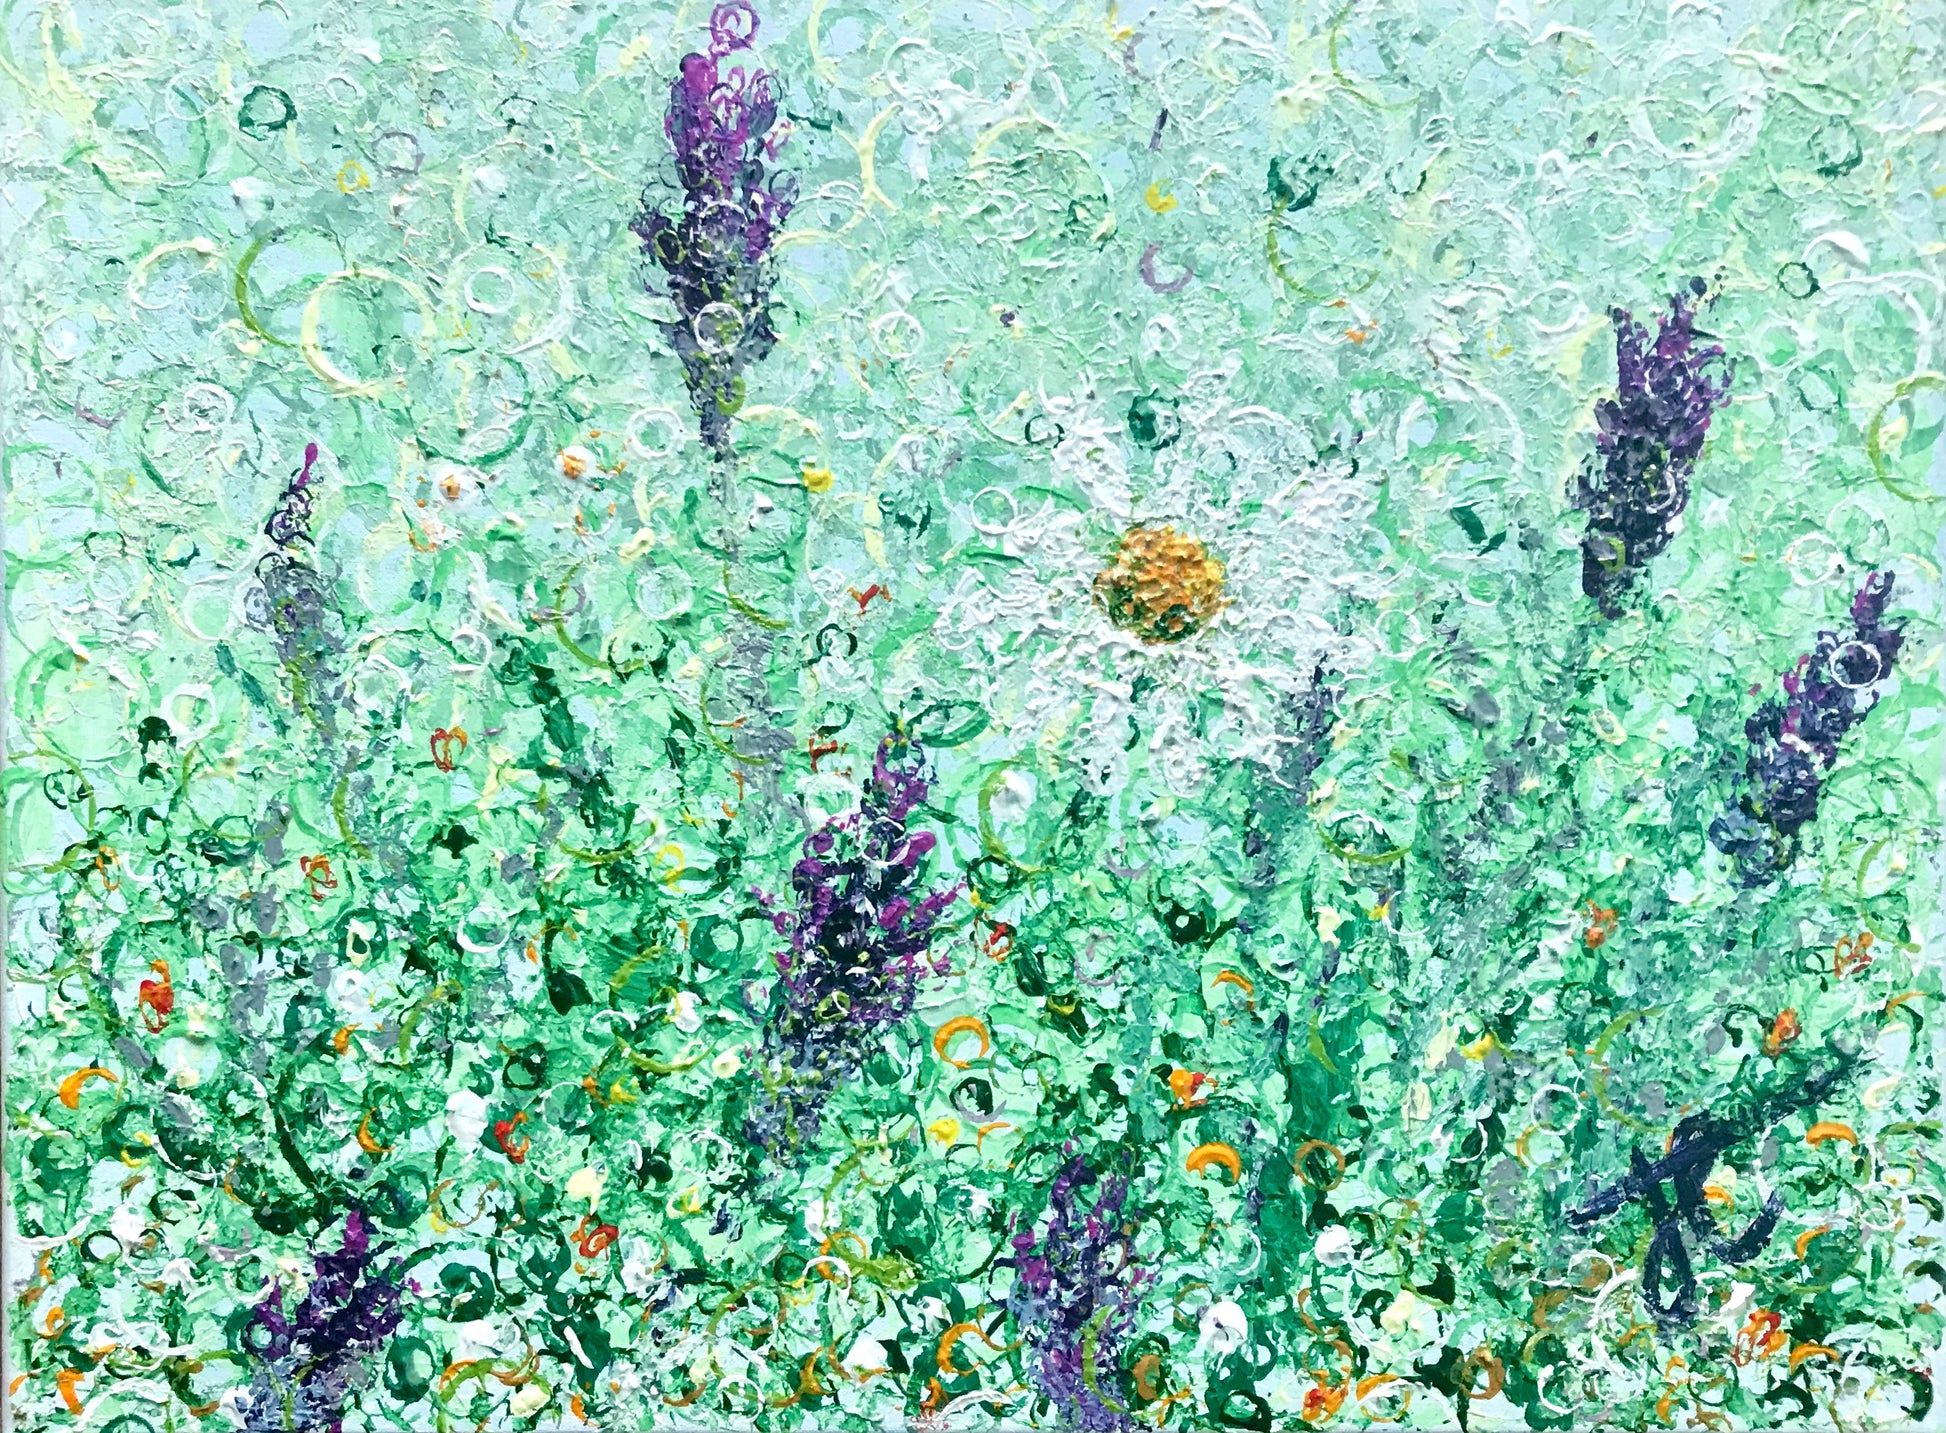 Painting cropped to edge: a white daisy with yellow centre blooms amidst lavender. The surface of the painting is composed entirely of layers and layers of circles of different sizes.